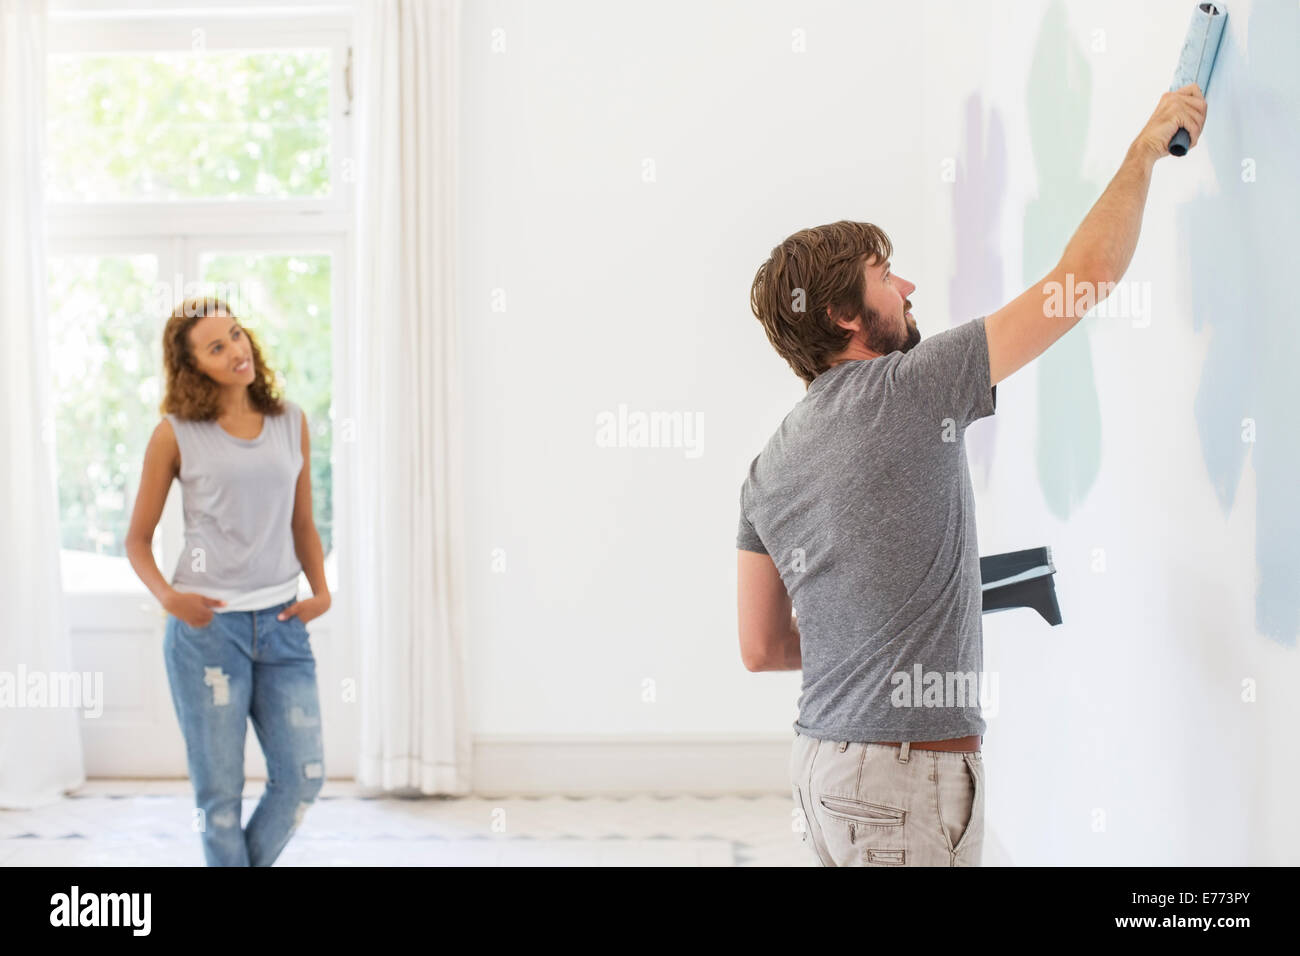 Man painting wall with girlfriend observing Stock Photo